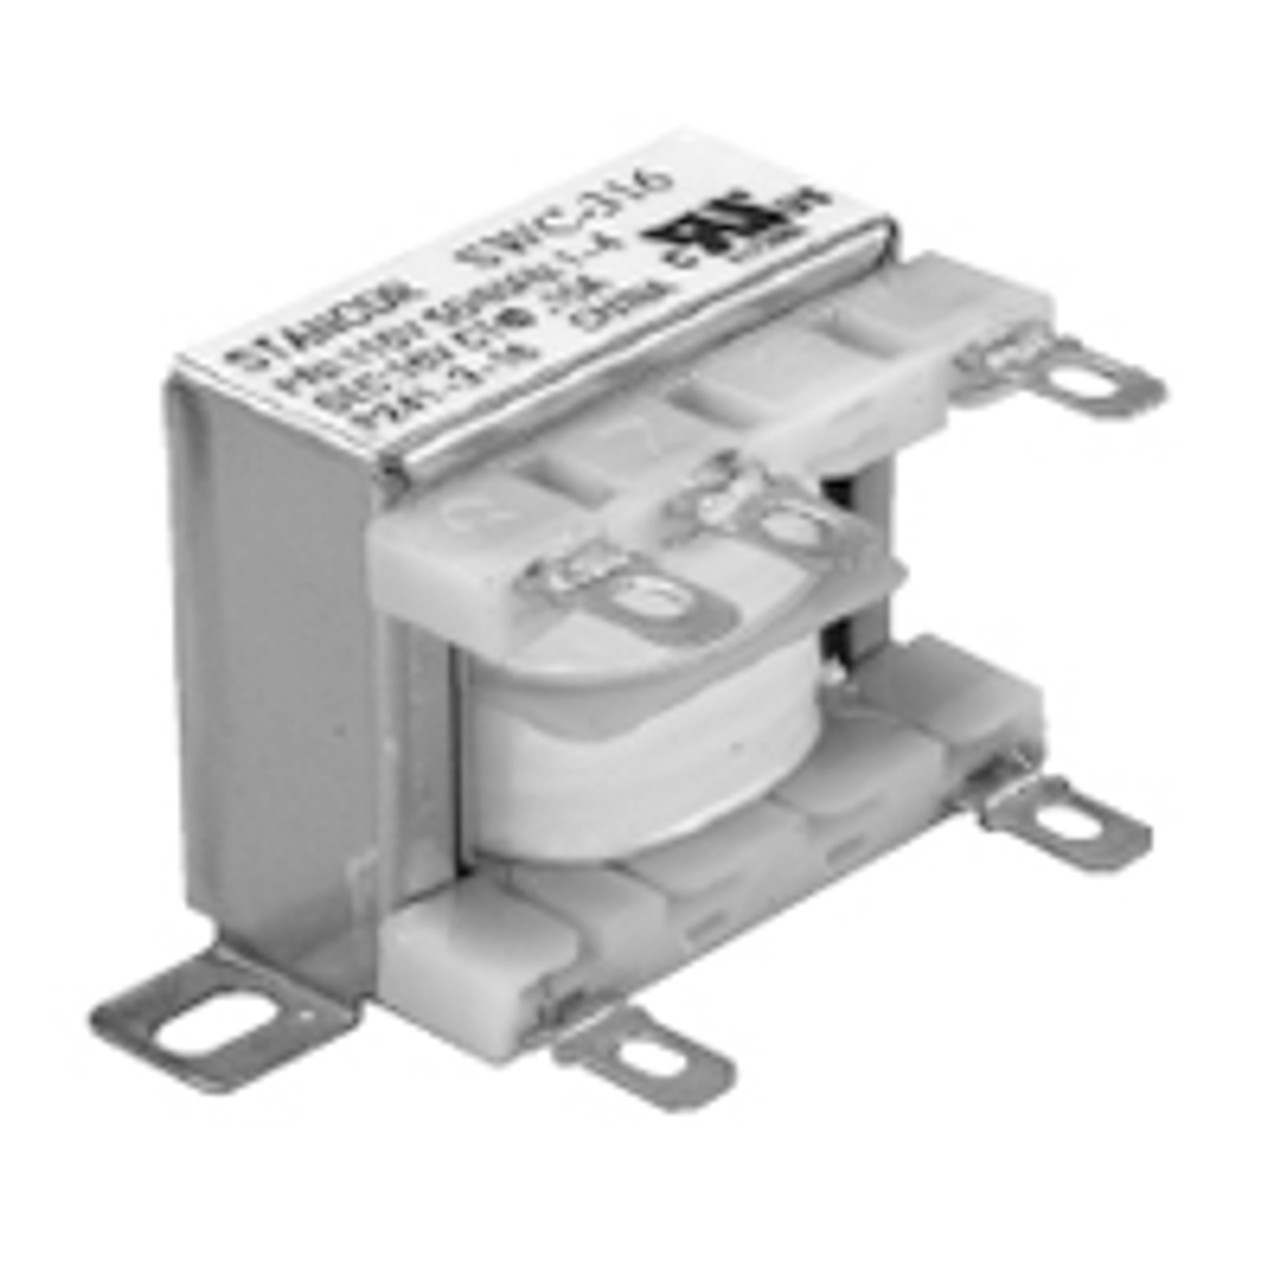 Stancor / White Rodgers SWC-528 Chassis Mount Power Transformers